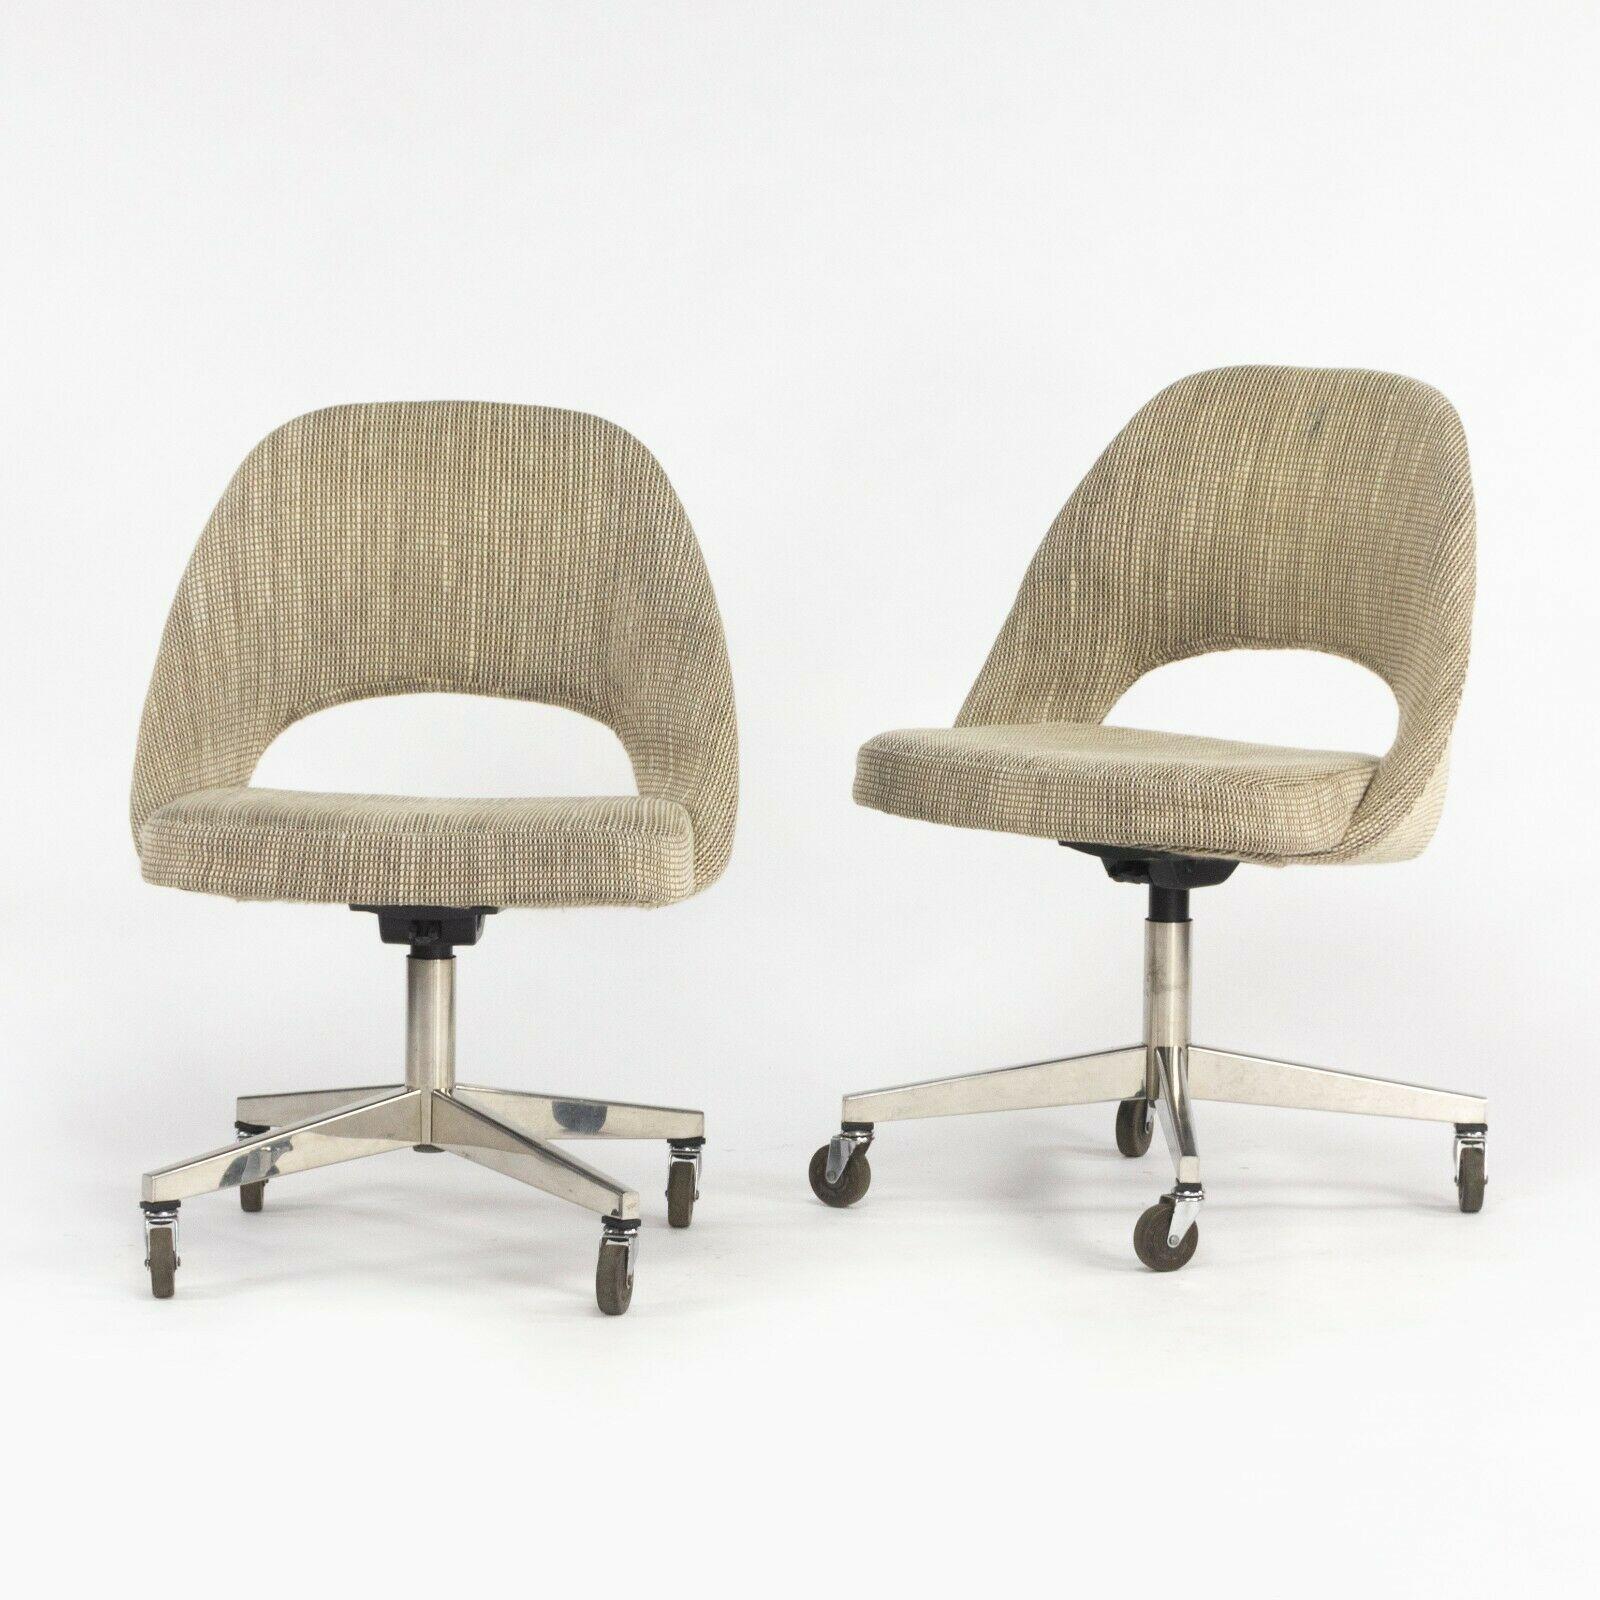 Listed for sale is a single (each chair is sold separately, though eight are available) Eero Saarinen rolling executive armless office chair. These are gorgeous and original examples, which are dated 1974 and came from an Ithaca, New York law